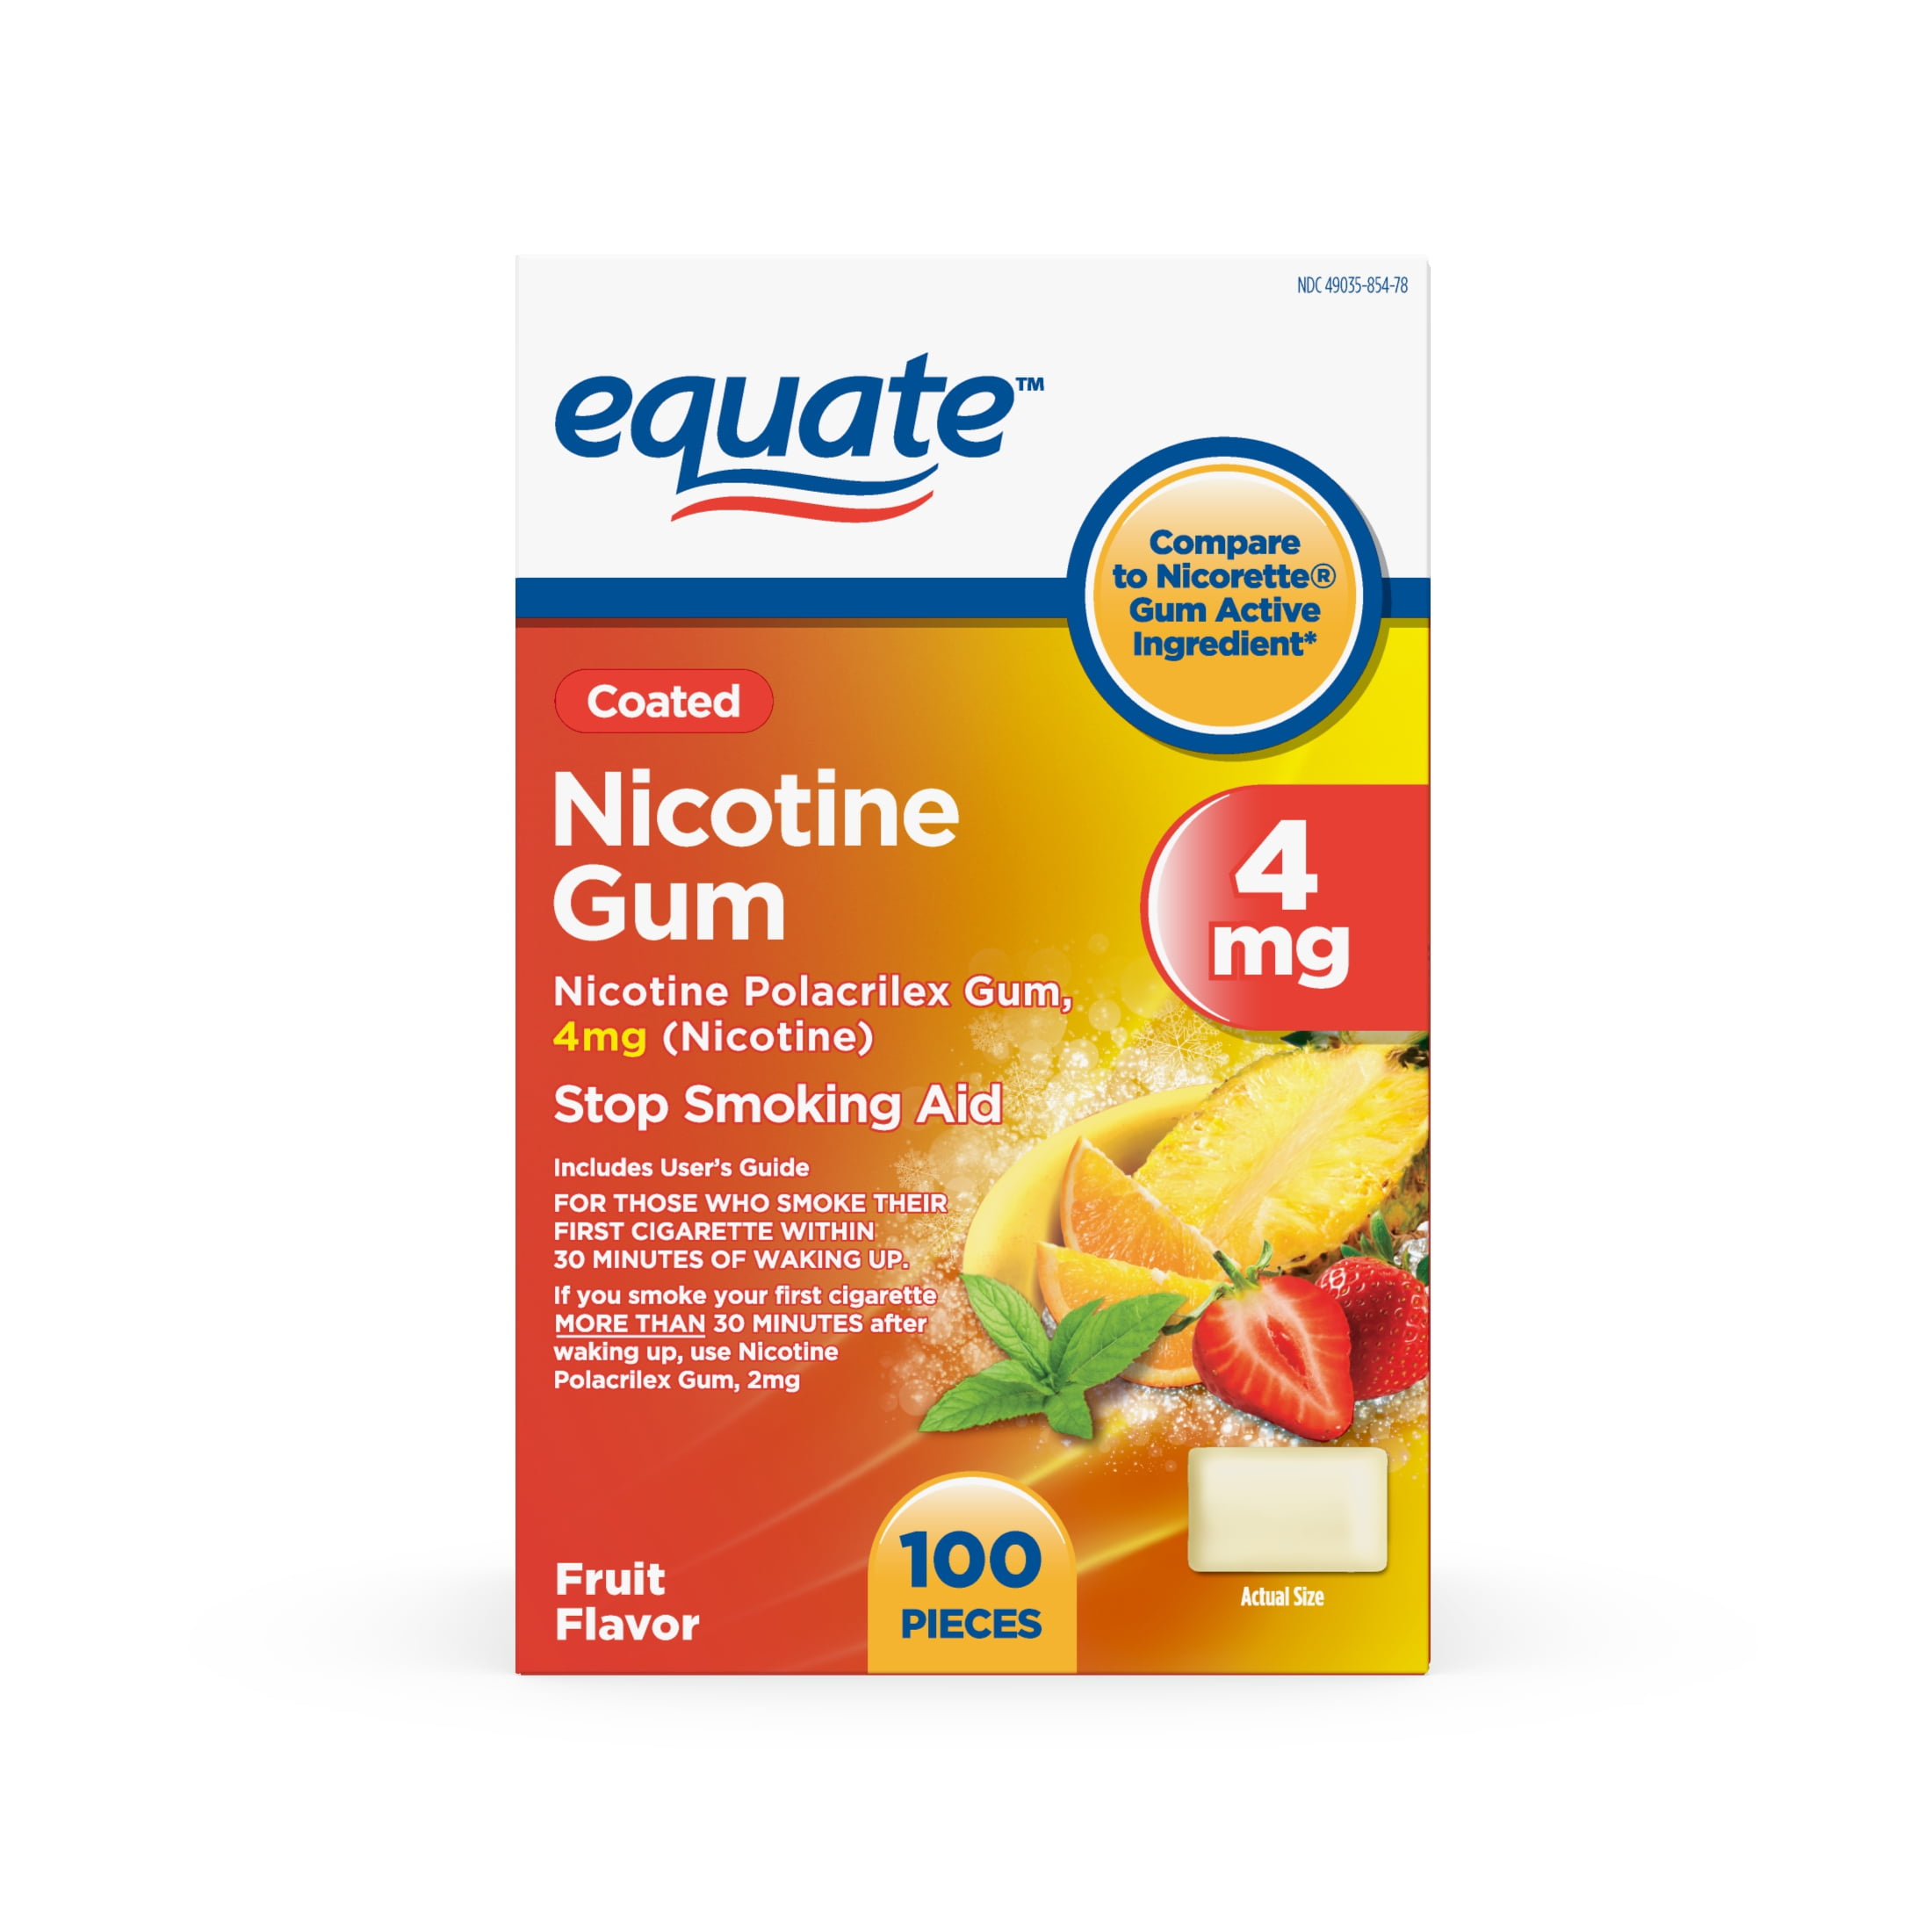 Equate Coated Nicotine Polacrilex Gum, 4 mg, Fruit Flavor, Stop Smoking Aid, 100 Count